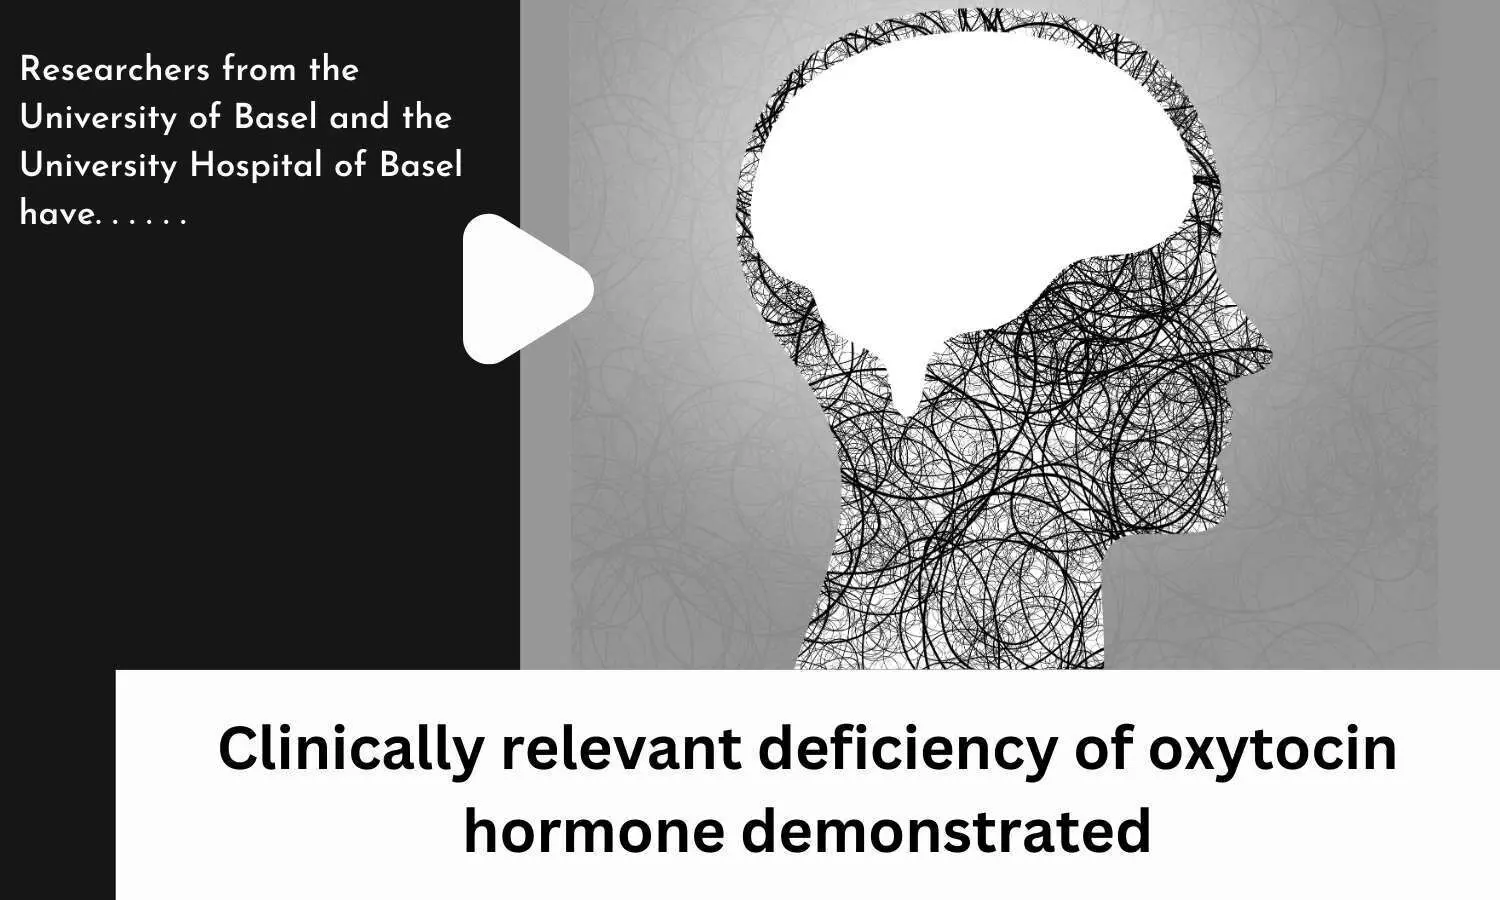 Clinically relevant deficiency of oxytocin hormone demonstrated